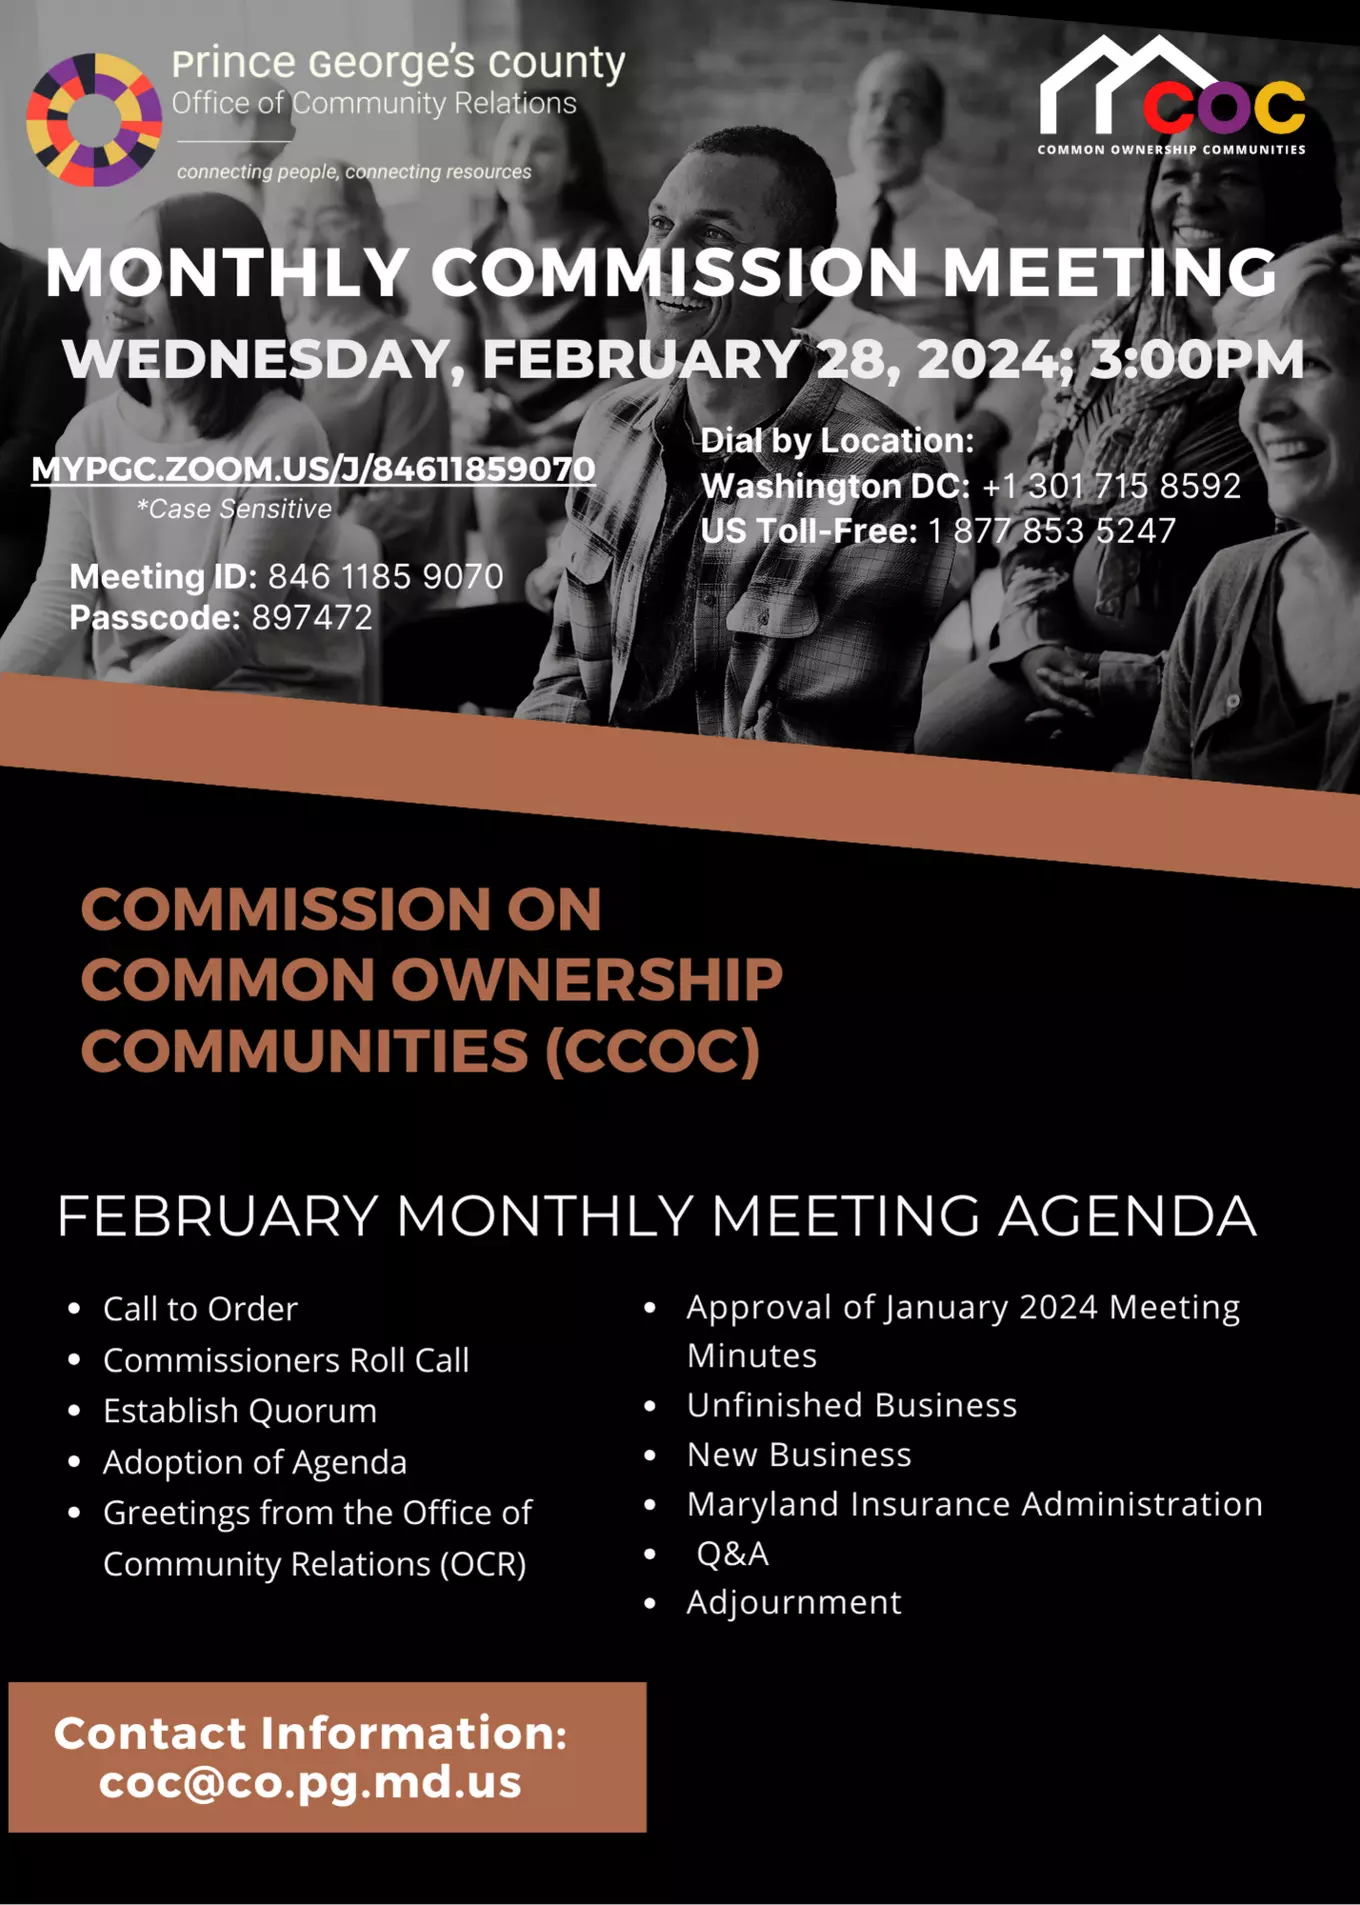 The Prince George’s County Office of Community Relations will partner with the Commission on Common Ownership Communities to host a virtual meeting on Wednesday February 28th, 2023, at 3:00 pm.